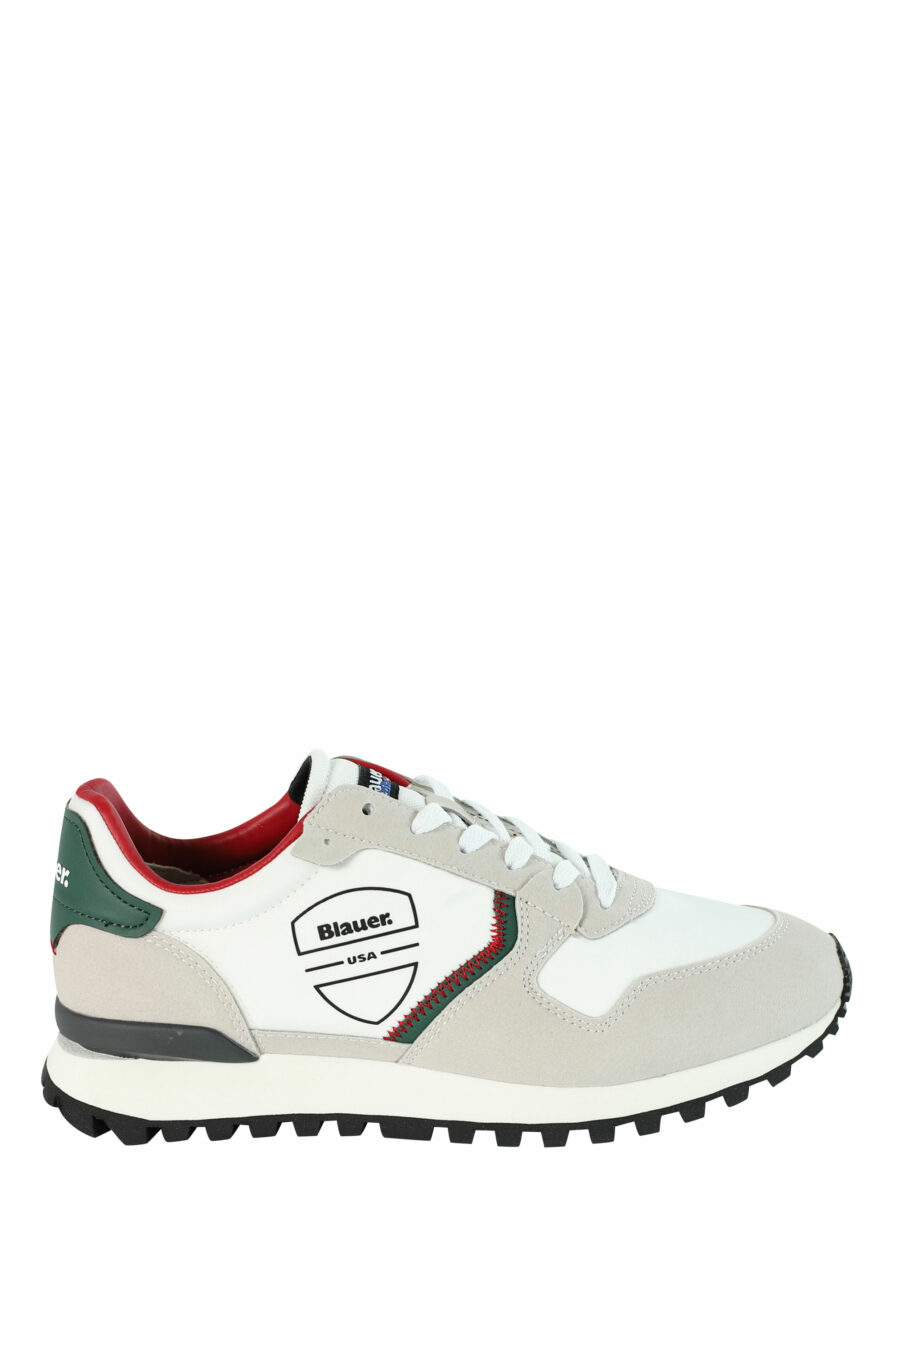 Trainers "DIXON" white mix with red and green details - 8058156493902